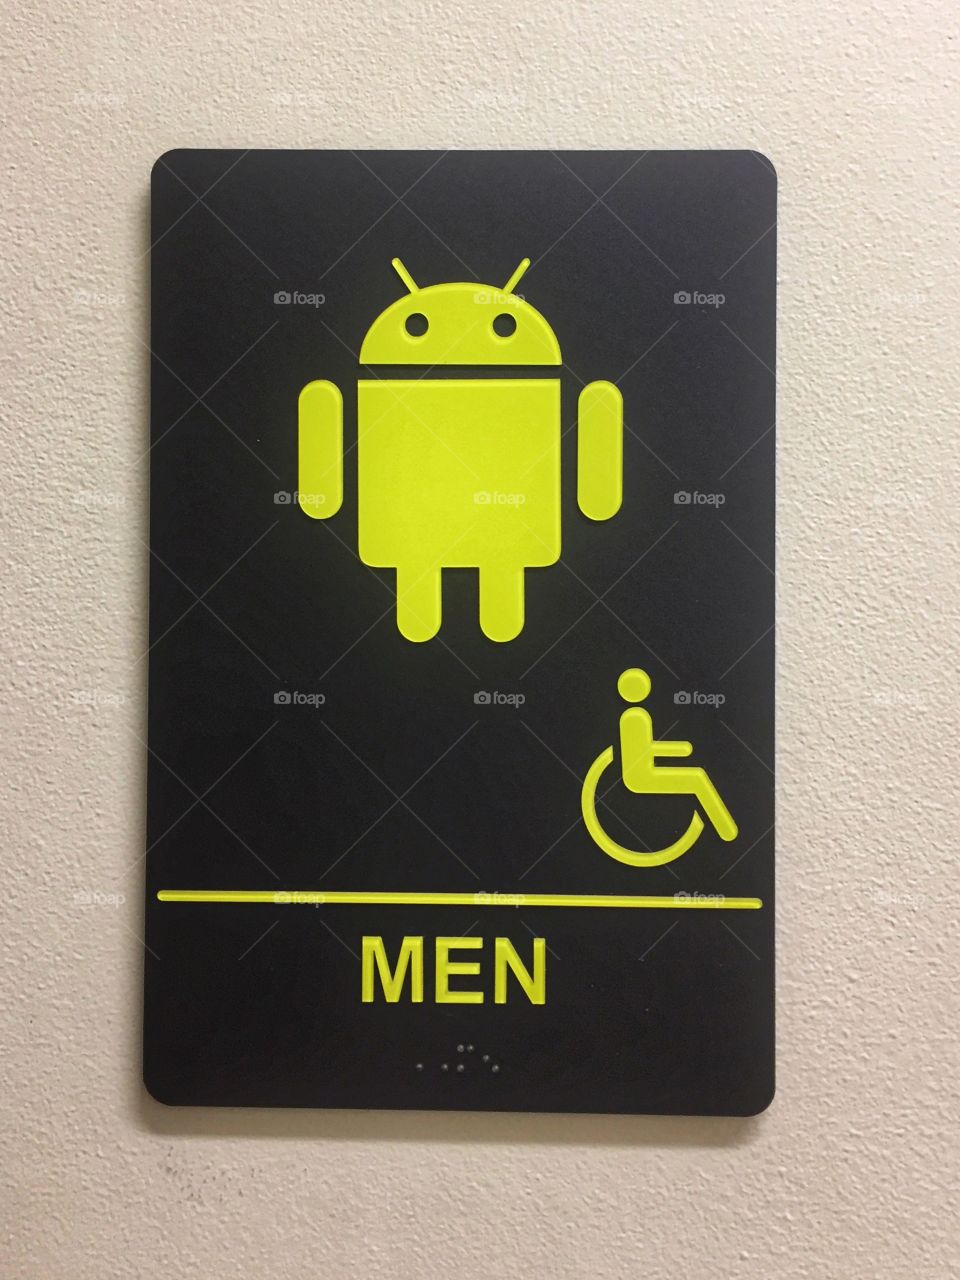 Android women toilet sign 